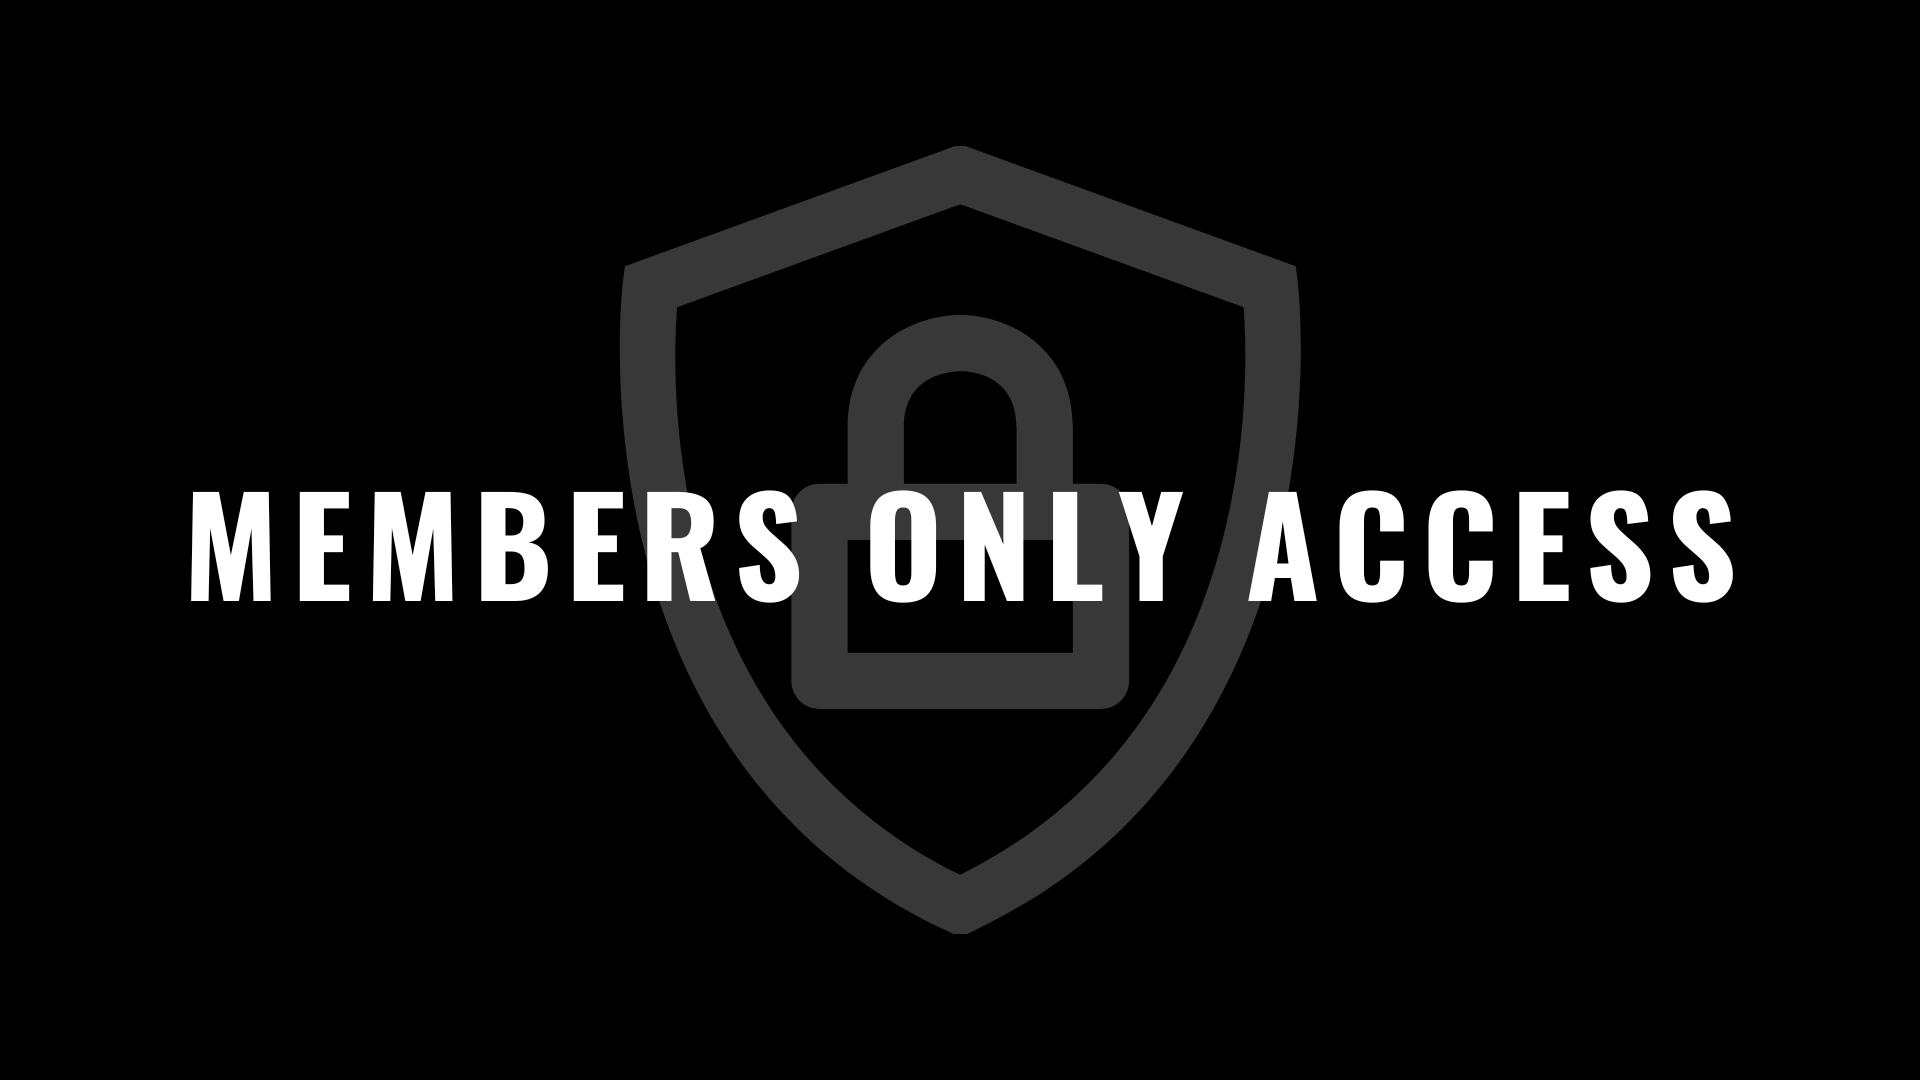 Members only access